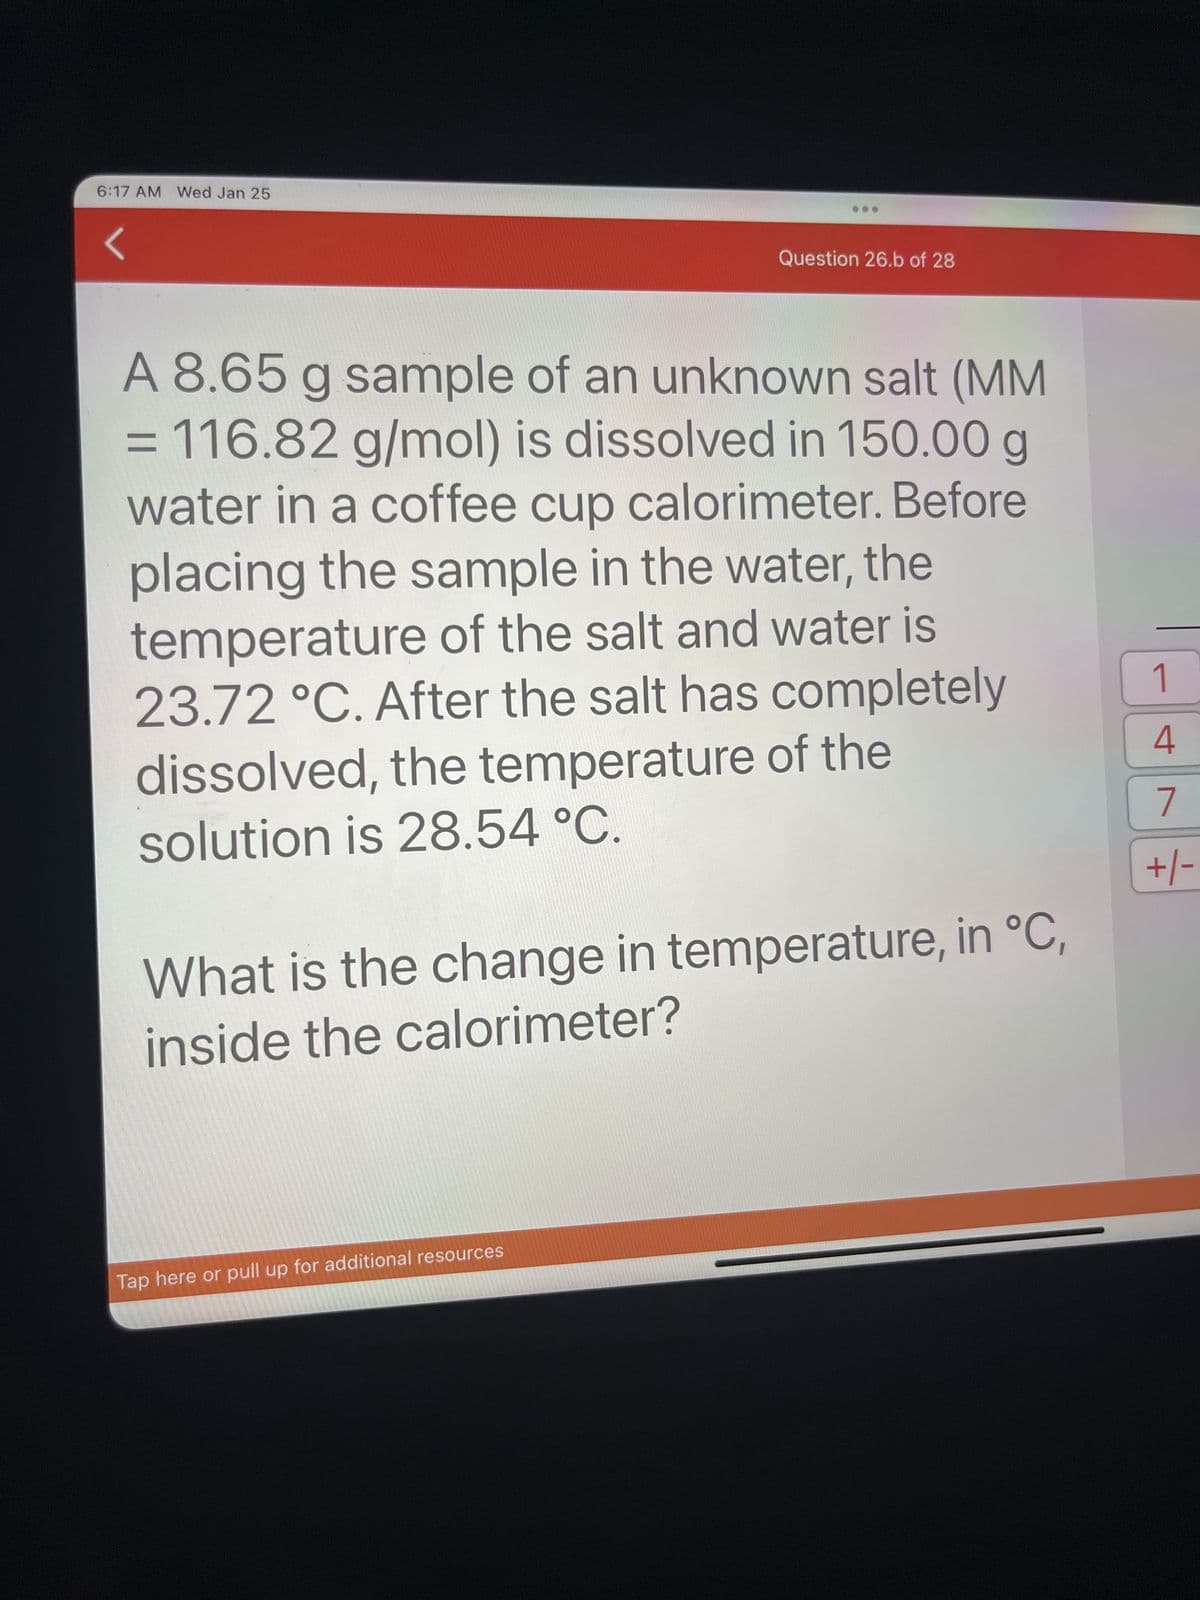 6:17 AM Wed Jan 25
Question 26.b of 28
A 8.65 g sample of an unknown salt (MM
= 116.82 g/mol) is dissolved in 150.00 g
water in a coffee cup calorimeter. Before
placing the sample in the water, the
temperature of the salt and water is
23.72 °C. After the salt has completely
dissolved, the temperature of the
solution is 28.54 °C.
What is the change in temperature, in °C,
inside the calorimeter?
Tap here or pull up for additional resources
1
4
7
+/-